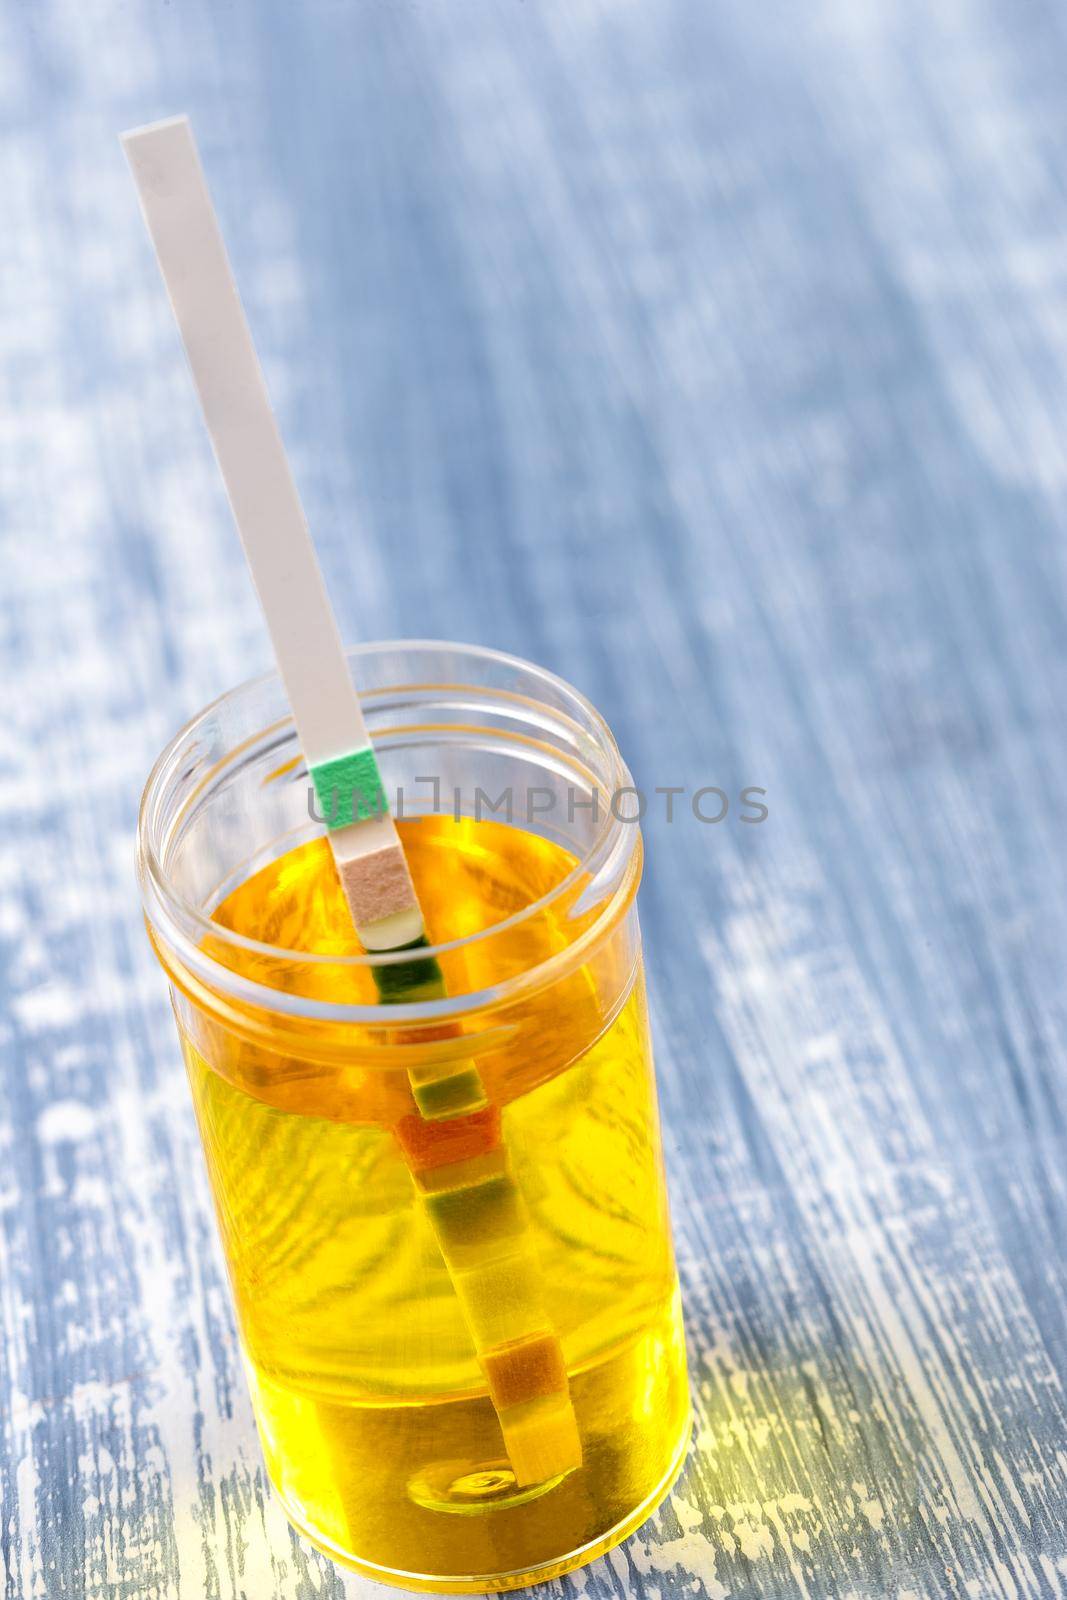 Conceptual image on urin alysis, dipstick placed on the vials of urine by JPC-PROD